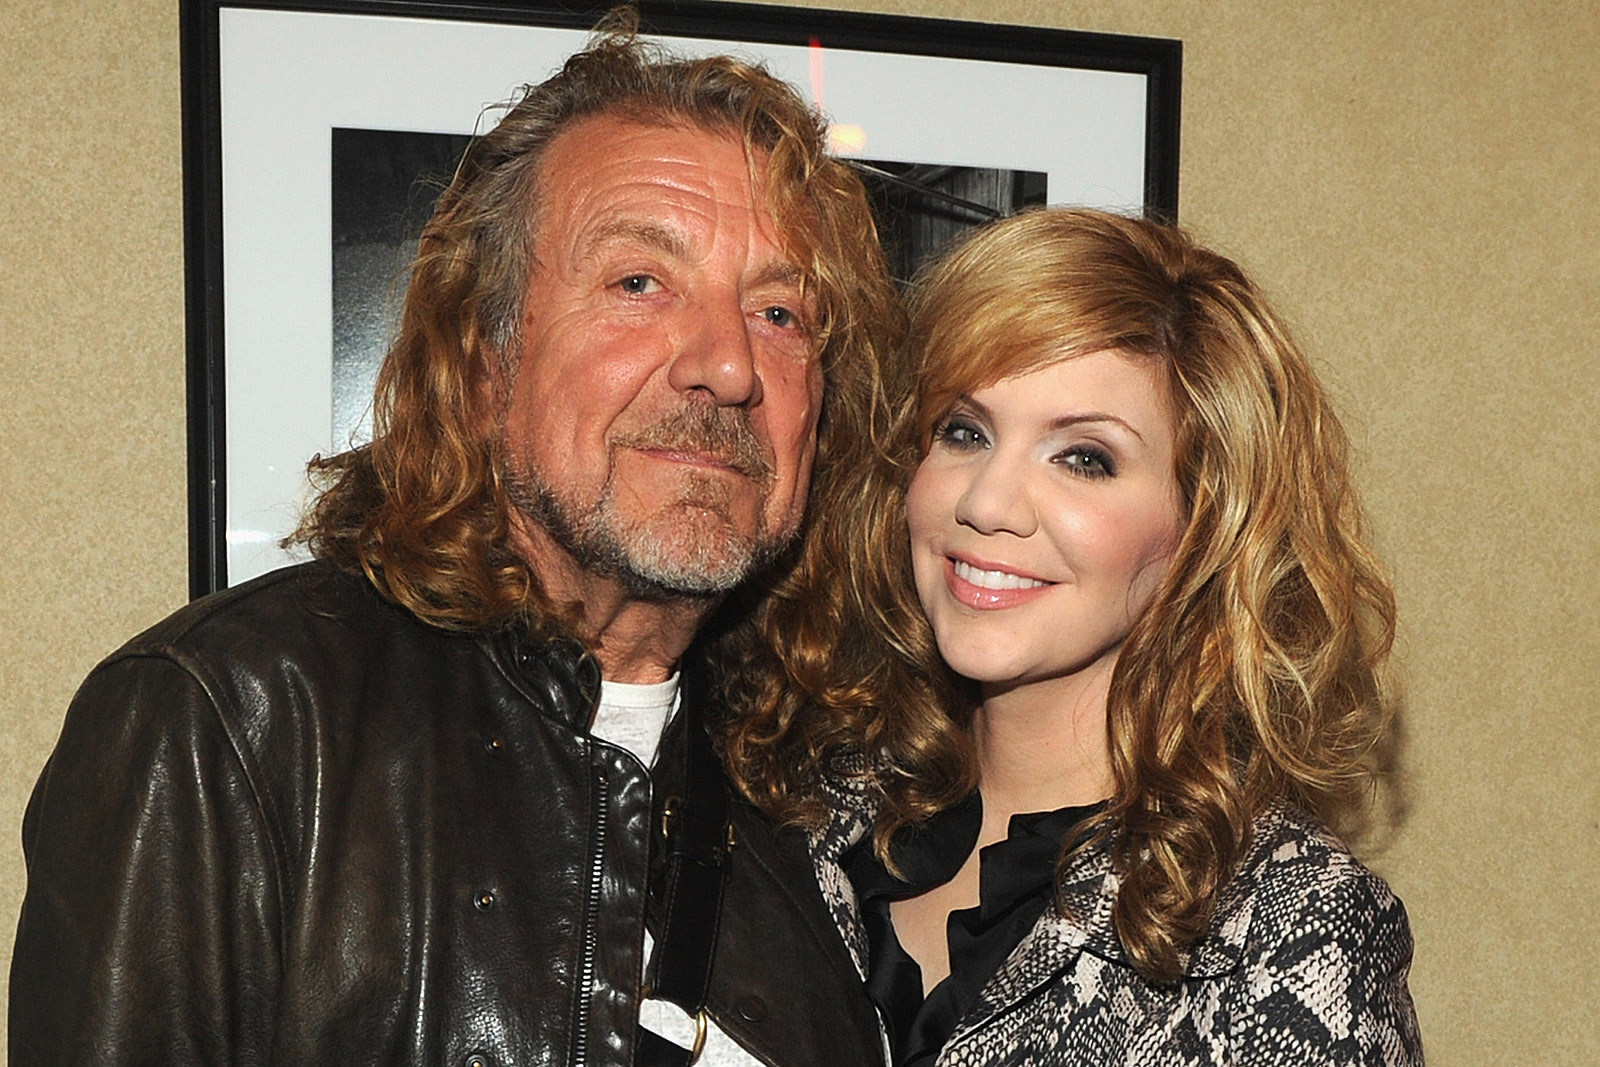 How Robert Plant Won A Grammy In The Alison Krauss Category